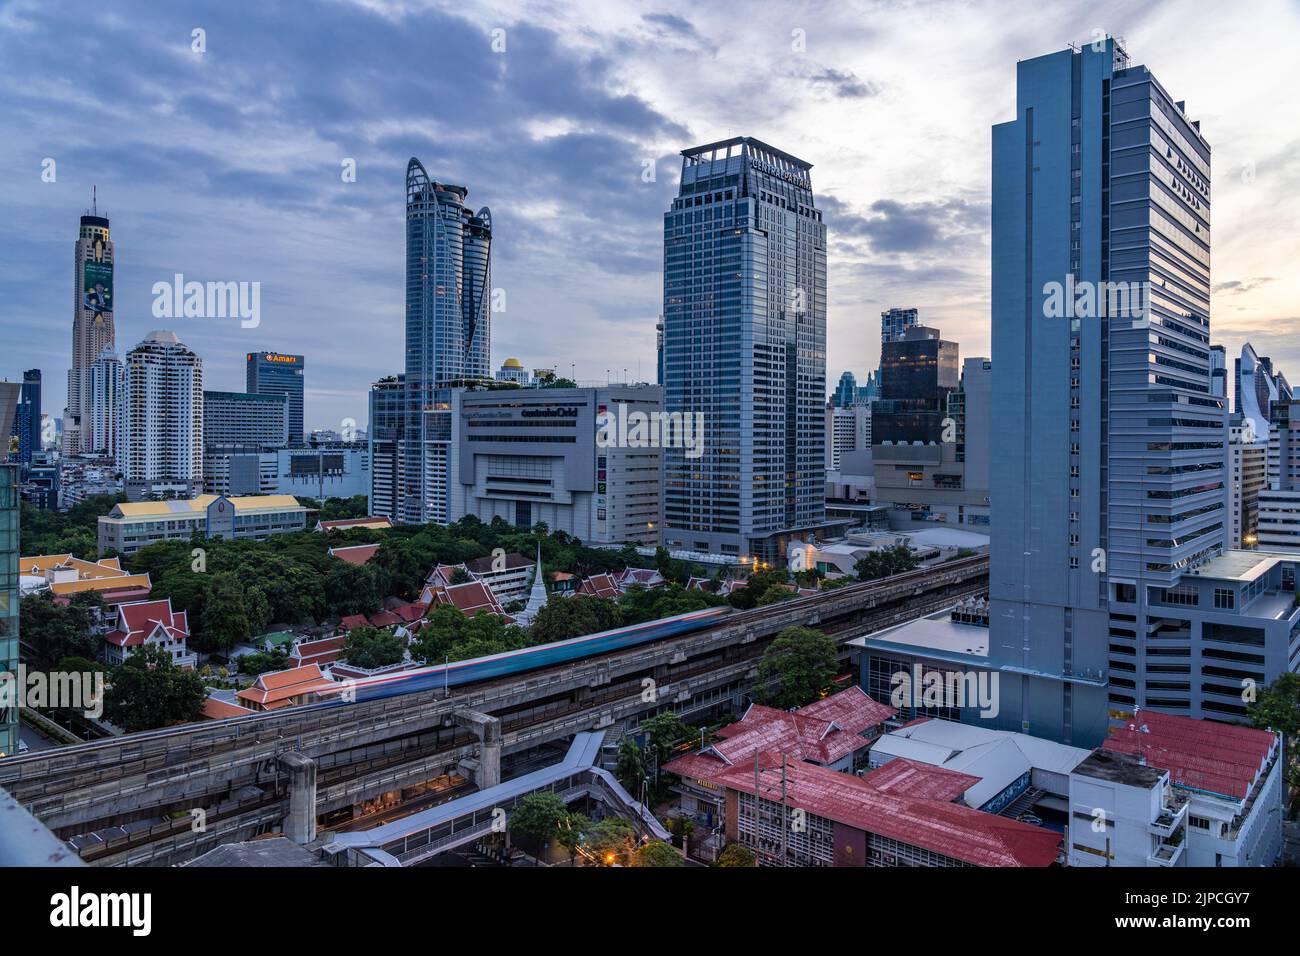 Bangkok, Thailand - 11 August 2022 - Aerial view of Bangkok cityscape in the morning before sunrise showing high-rises and running BTS skytrains and c Stock Photo